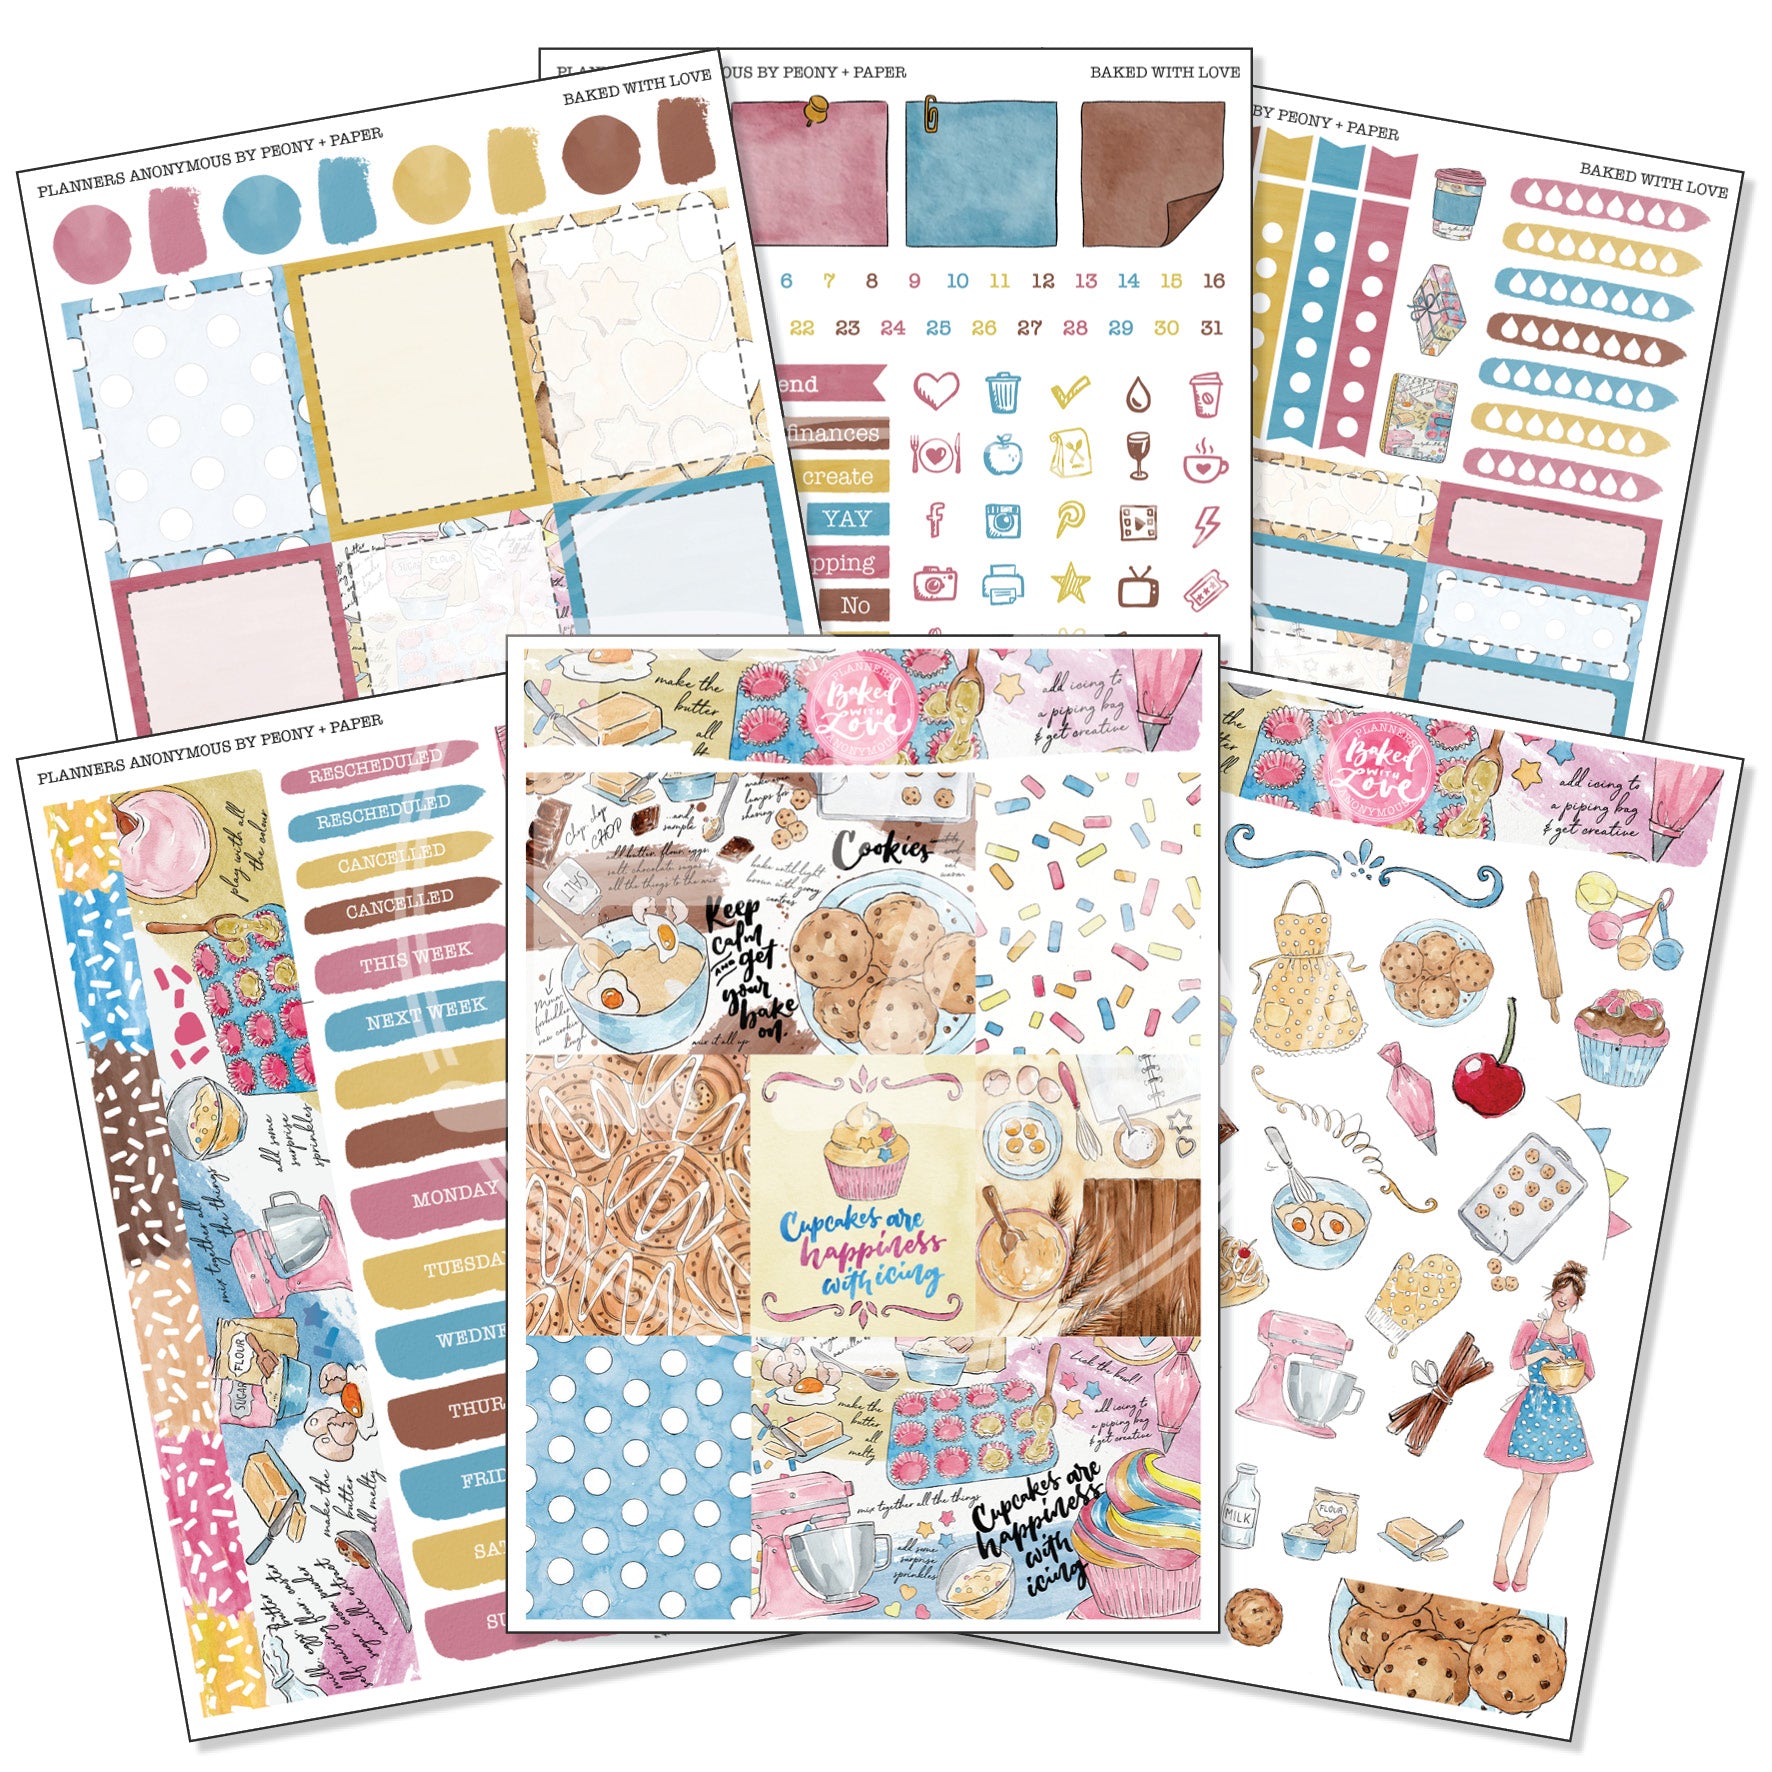 Baked With Love - Weekly Sticker Kit